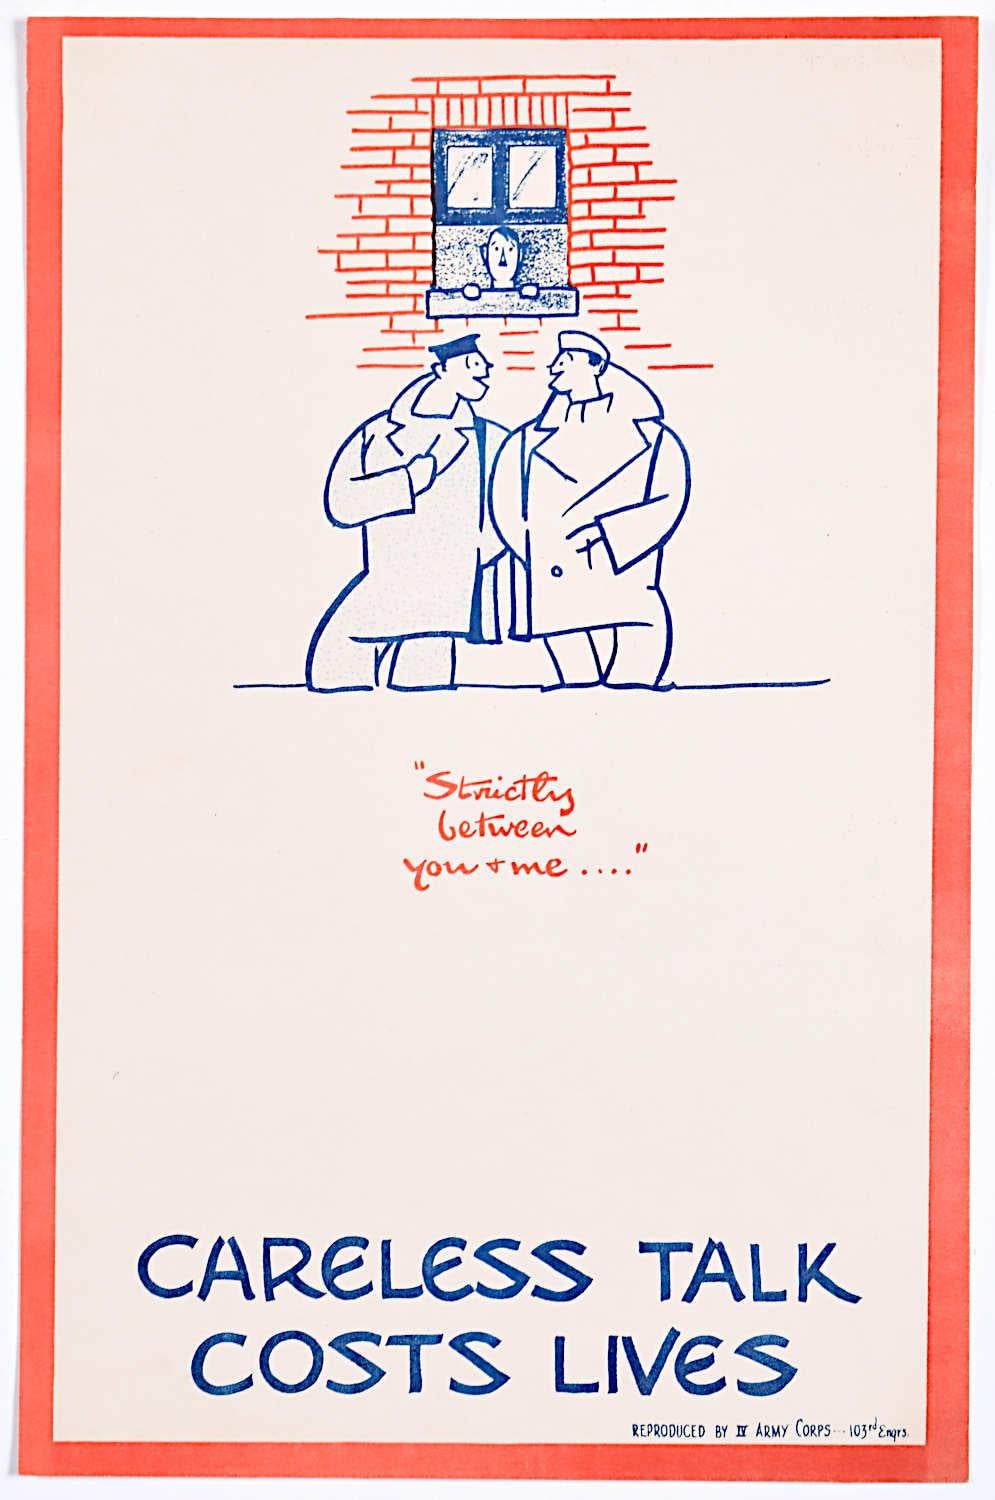 Fougasse (Cyril Kenneth Bird) Print - Careless Talk Costs Lives 'Fougasse' IV Army Corps Edition World War 2 Poster